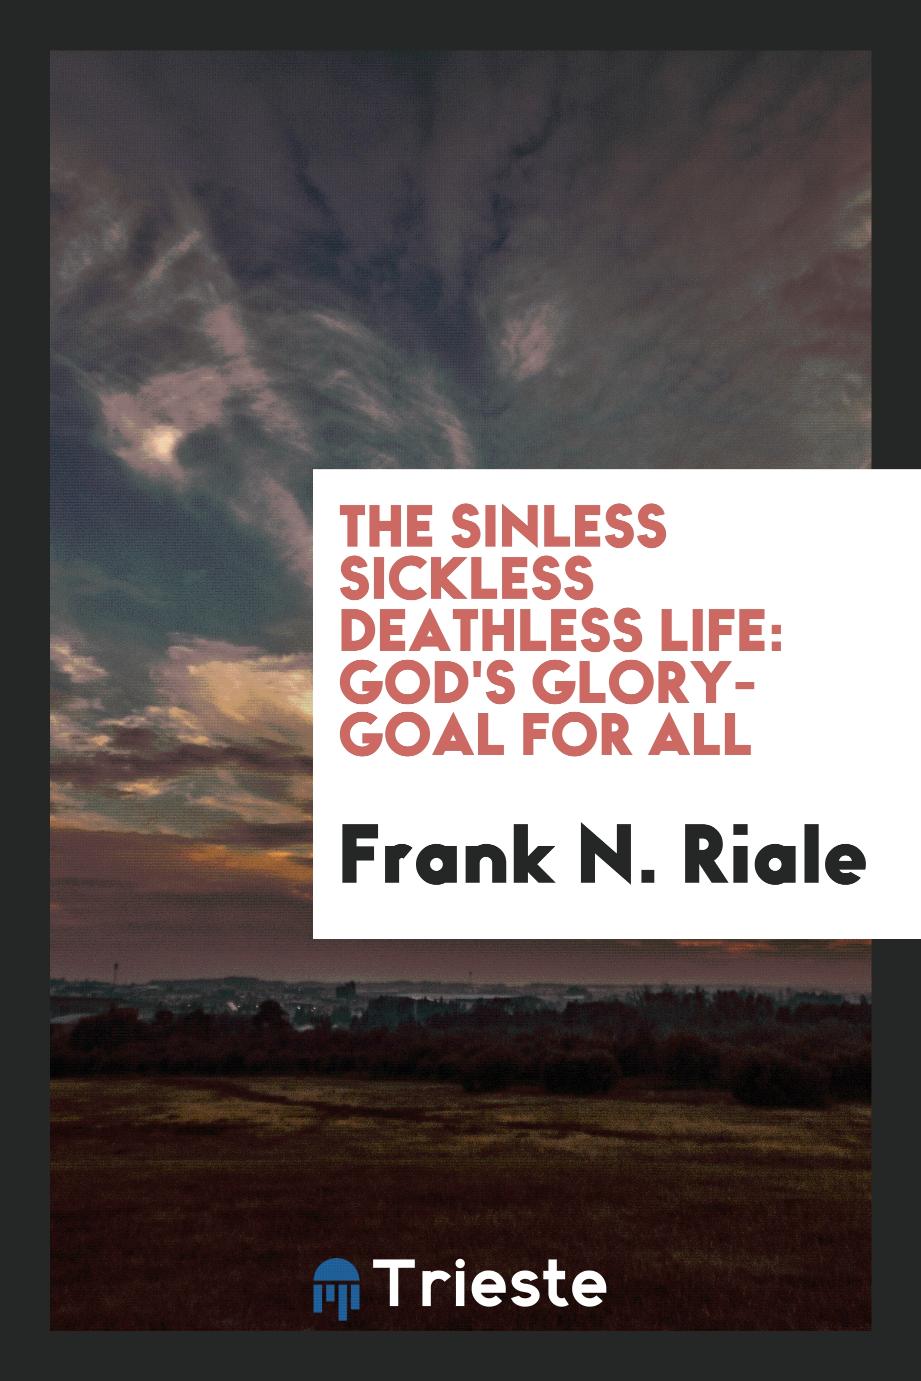 The sinless sickless deathless life: God's glory-goal for all